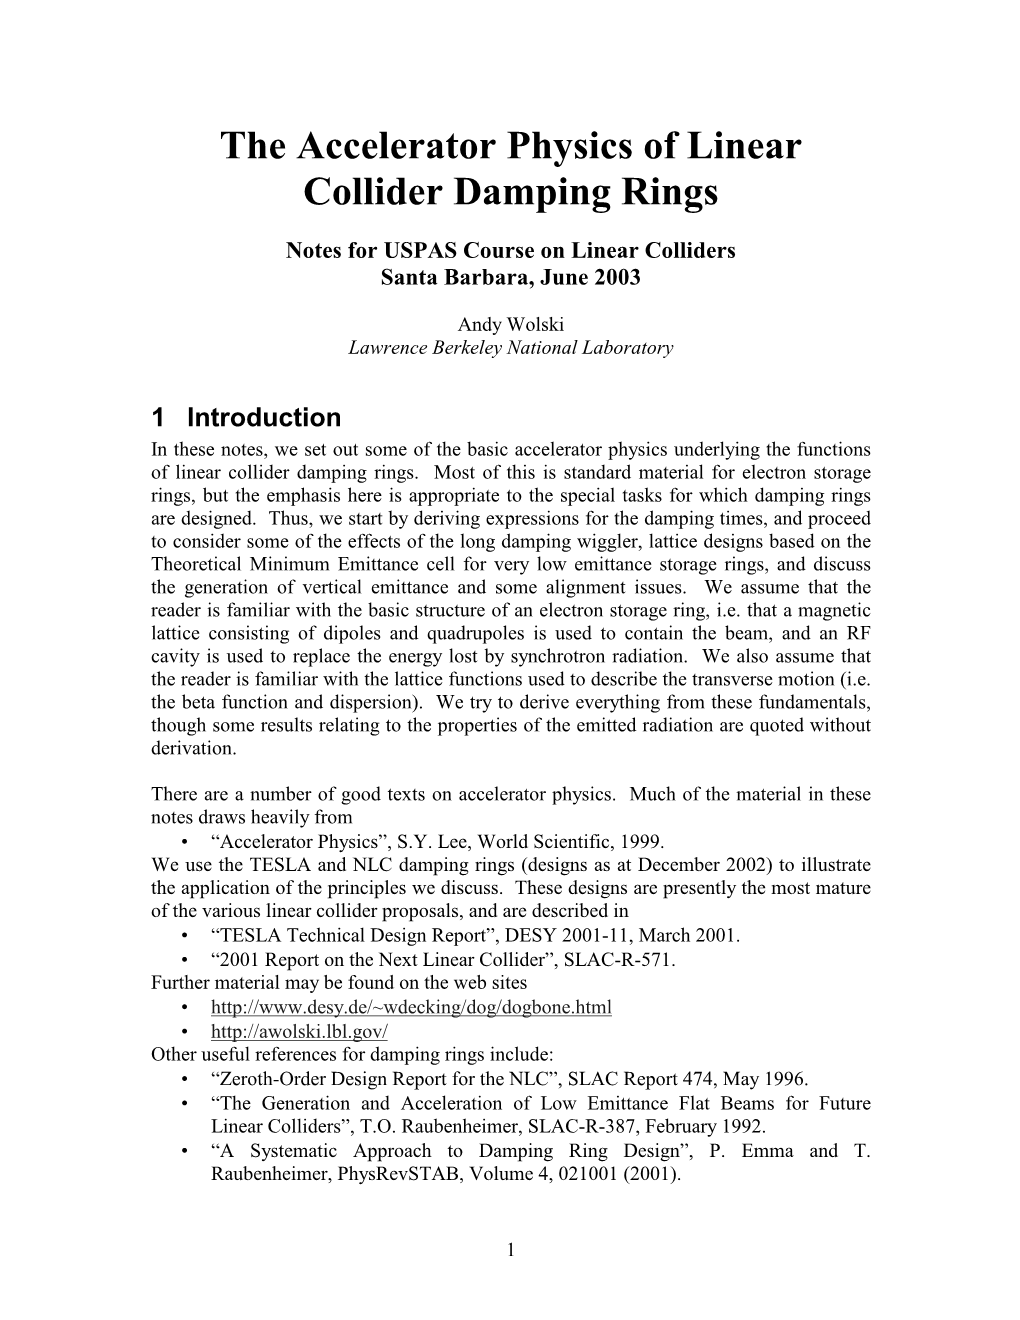 The Accelerator Physics of Linear Collider Damping Rings